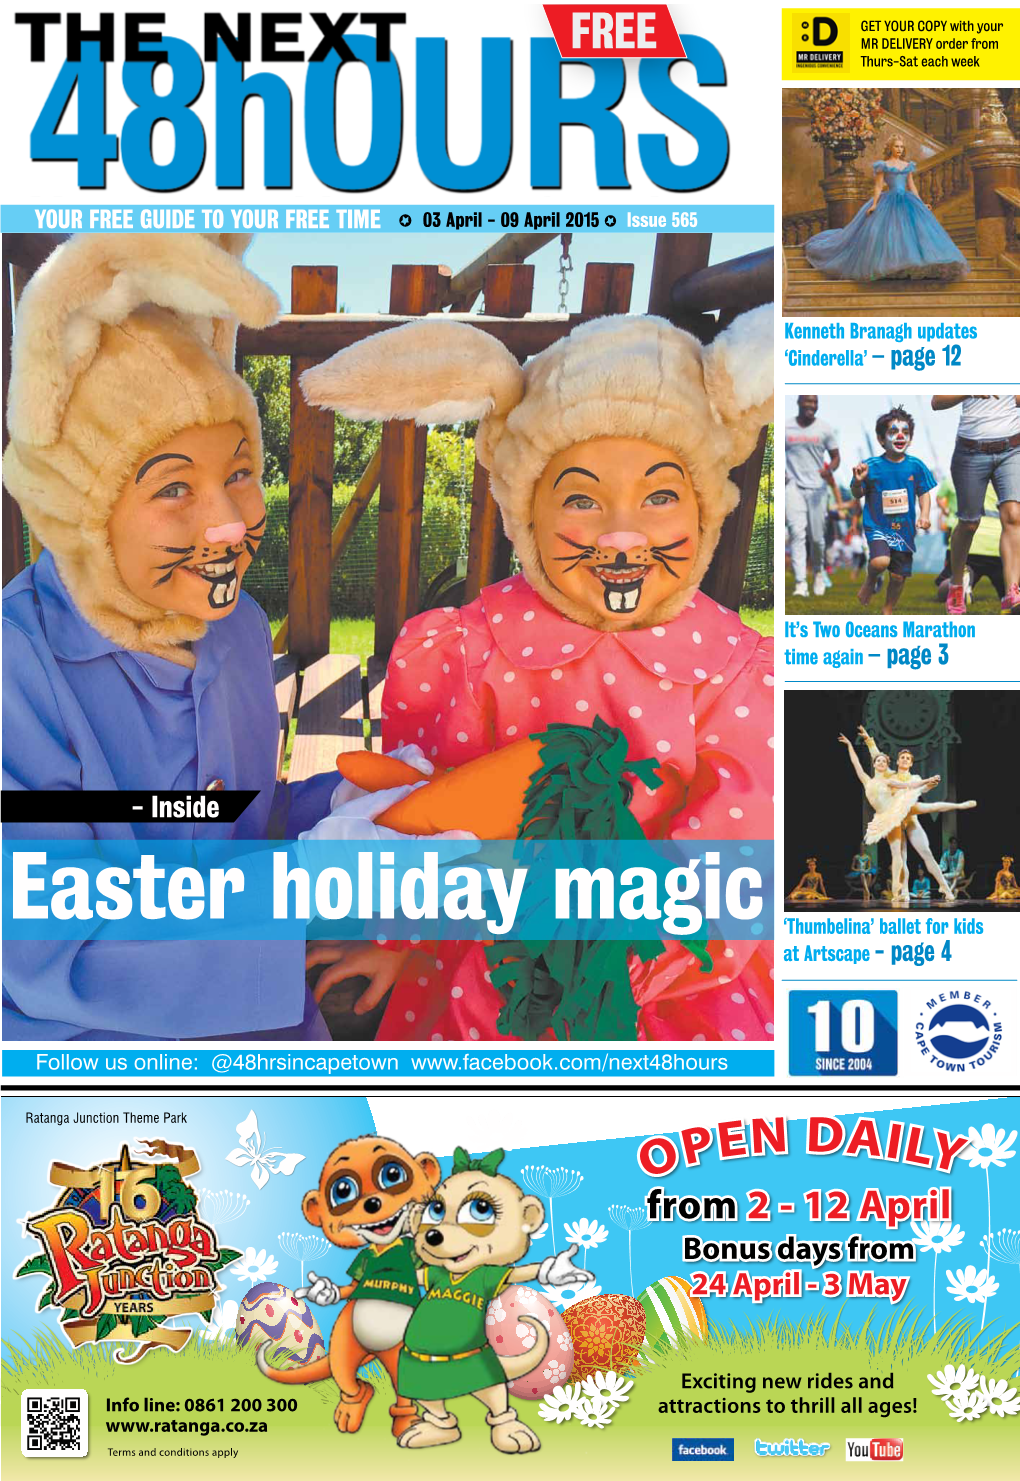 Easter Holiday Magic ‘Thumbelina’ Ballet for Kids at Artscape - Page 4